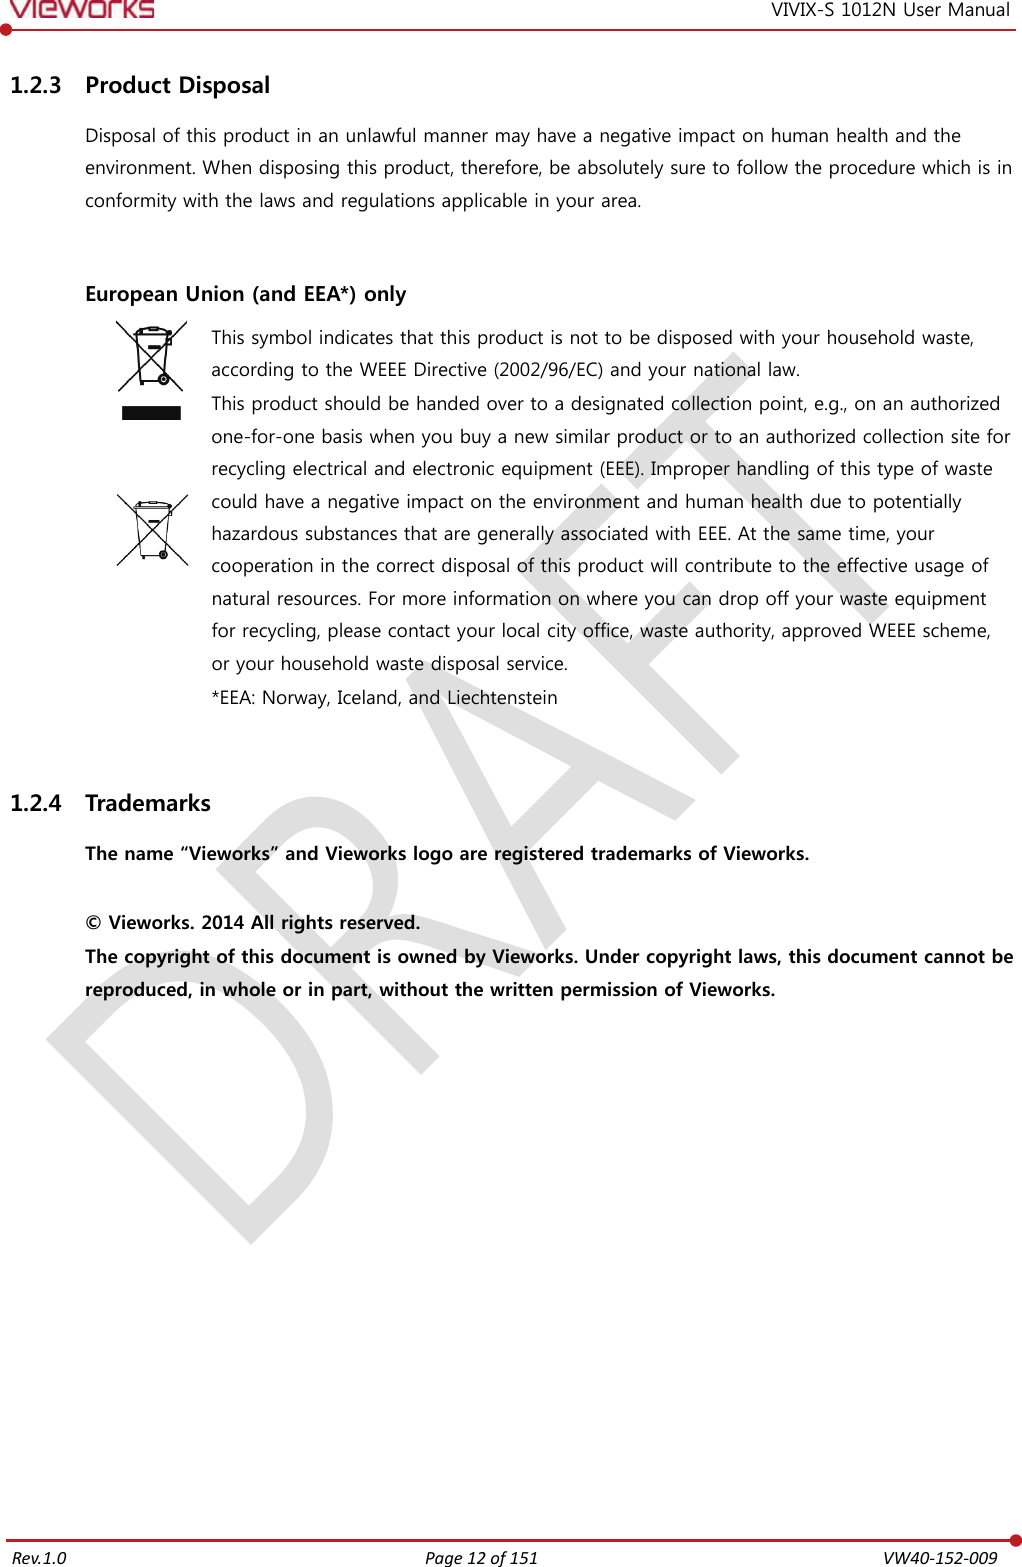   Rev.1.0 Page 12 of 151  VW40-152-009 VIVIX-S 1012N User Manual 1.2.3 Product Disposal Disposal of this product in an unlawful manner may have a negative impact on human health and the environment. When disposing this product, therefore, be absolutely sure to follow the procedure which is in conformity with the laws and regulations applicable in your area.   European Union (and EEA*) only     This symbol indicates that this product is not to be disposed with your household waste, according to the WEEE Directive (2002/96/EC) and your national law. This product should be handed over to a designated collection point, e.g., on an authorized one-for-one basis when you buy a new similar product or to an authorized collection site for recycling electrical and electronic equipment (EEE). Improper handling of this type of waste could have a negative impact on the environment and human health due to potentially hazardous substances that are generally associated with EEE. At the same time, your cooperation in the correct disposal of this product will contribute to the effective usage of natural resources. For more information on where you can drop off your waste equipment for recycling, please contact your local city office, waste authority, approved WEEE scheme, or your household waste disposal service. *EEA: Norway, Iceland, and Liechtenstein  1.2.4 Trademarks The name “Vieworks” and Vieworks logo are registered trademarks of Vieworks.  © Vieworks. 2014 All rights reserved. The copyright of this document is owned by Vieworks. Under copyright laws, this document cannot be reproduced, in whole or in part, without the written permission of Vieworks.   